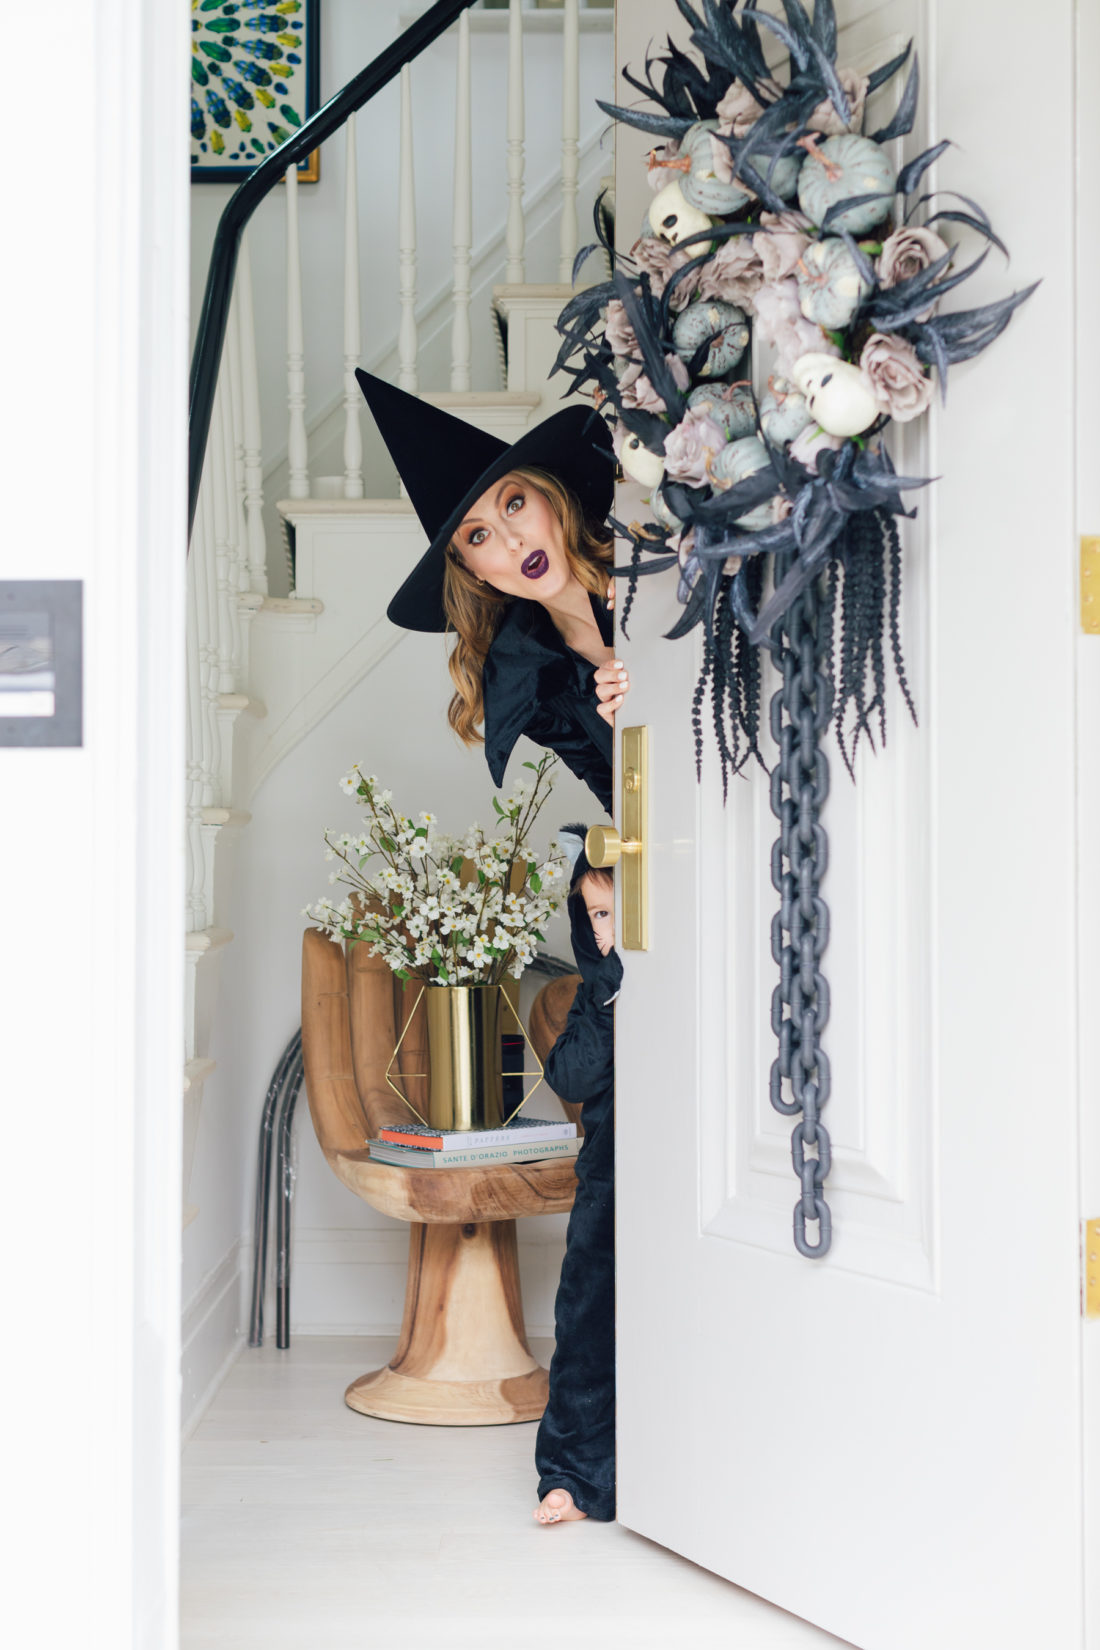 Eva Amurri Martino opens her front door to some trick or treaters